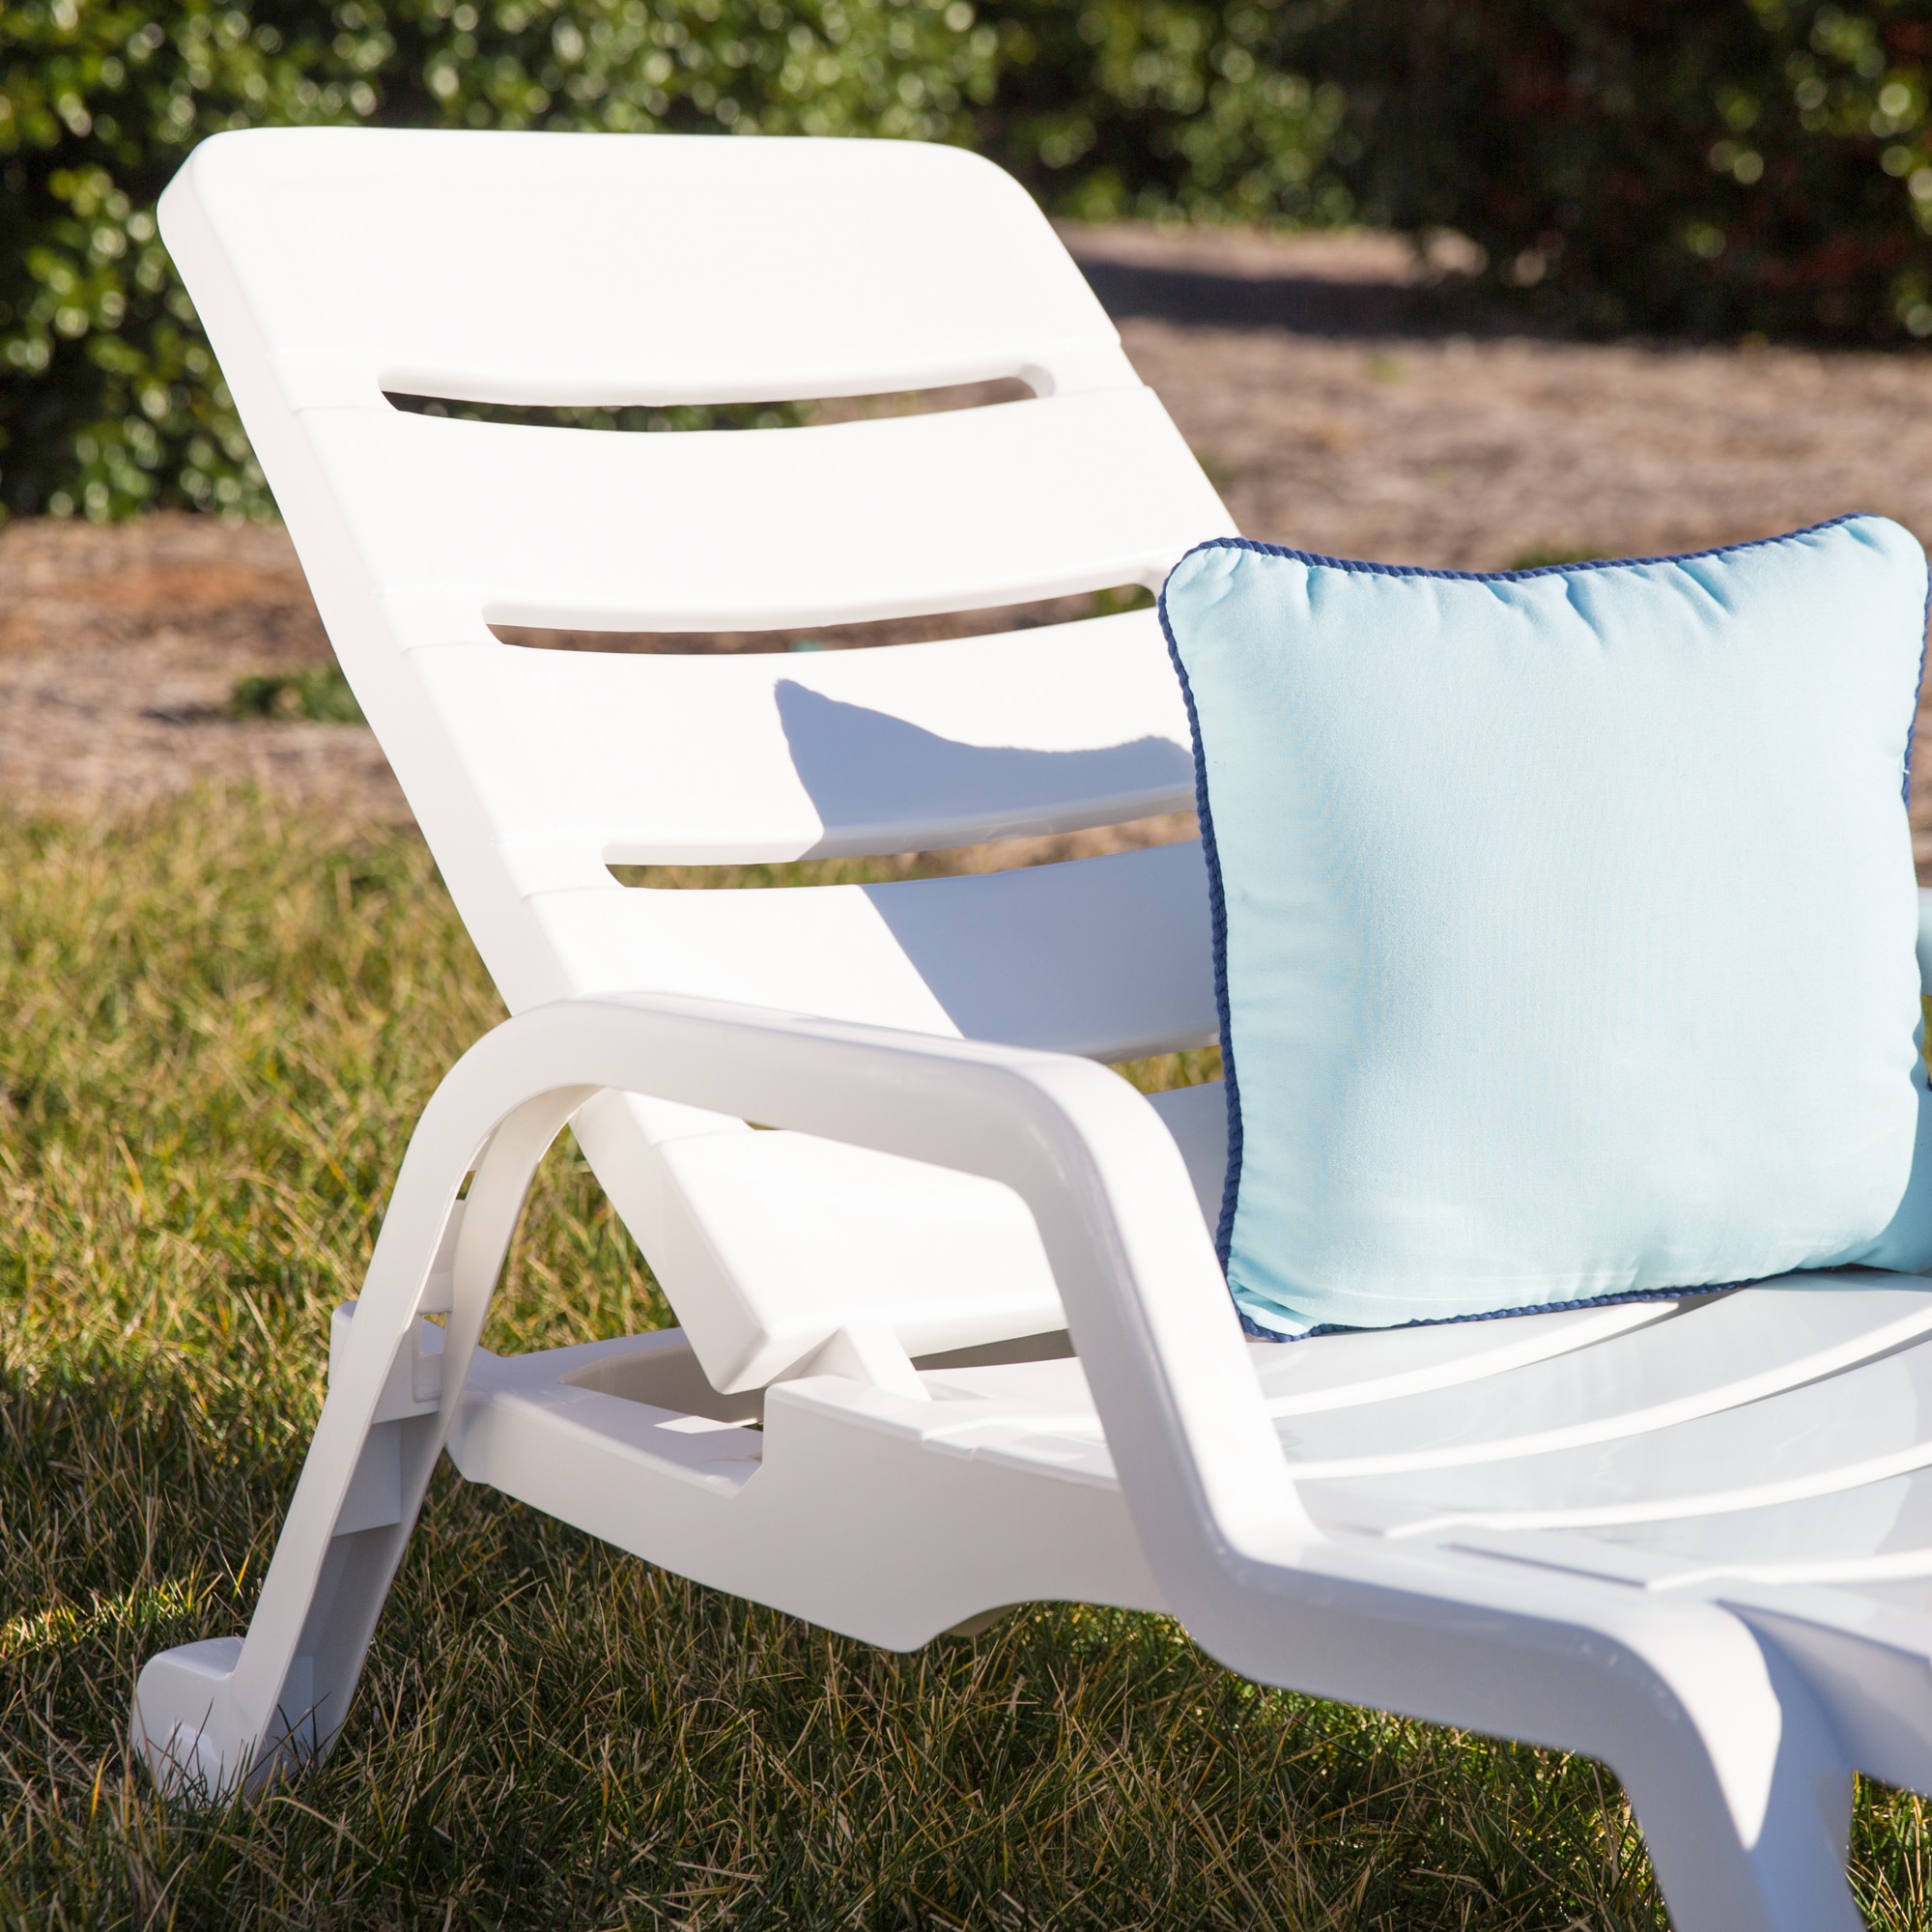 Chaise Lounge Patio Chairs At Lowes.Com